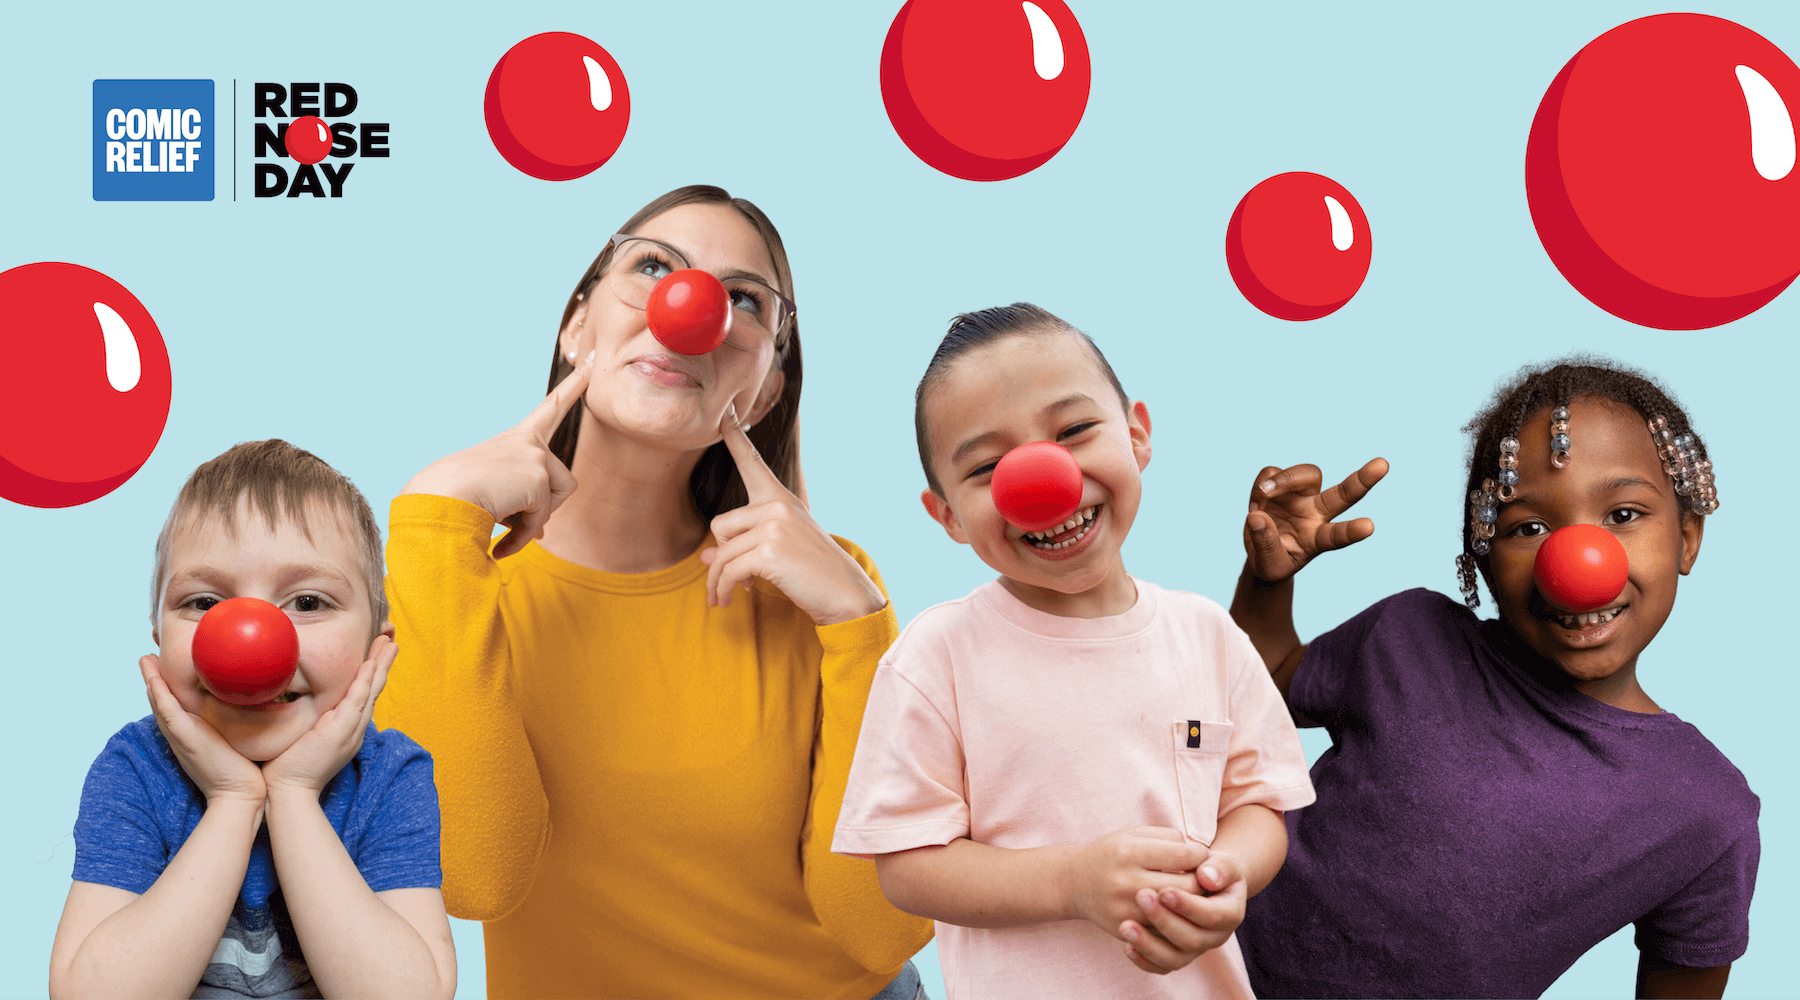 Red Nose Day Returns May 25 for Its Ninth Year To Raise Money, Change